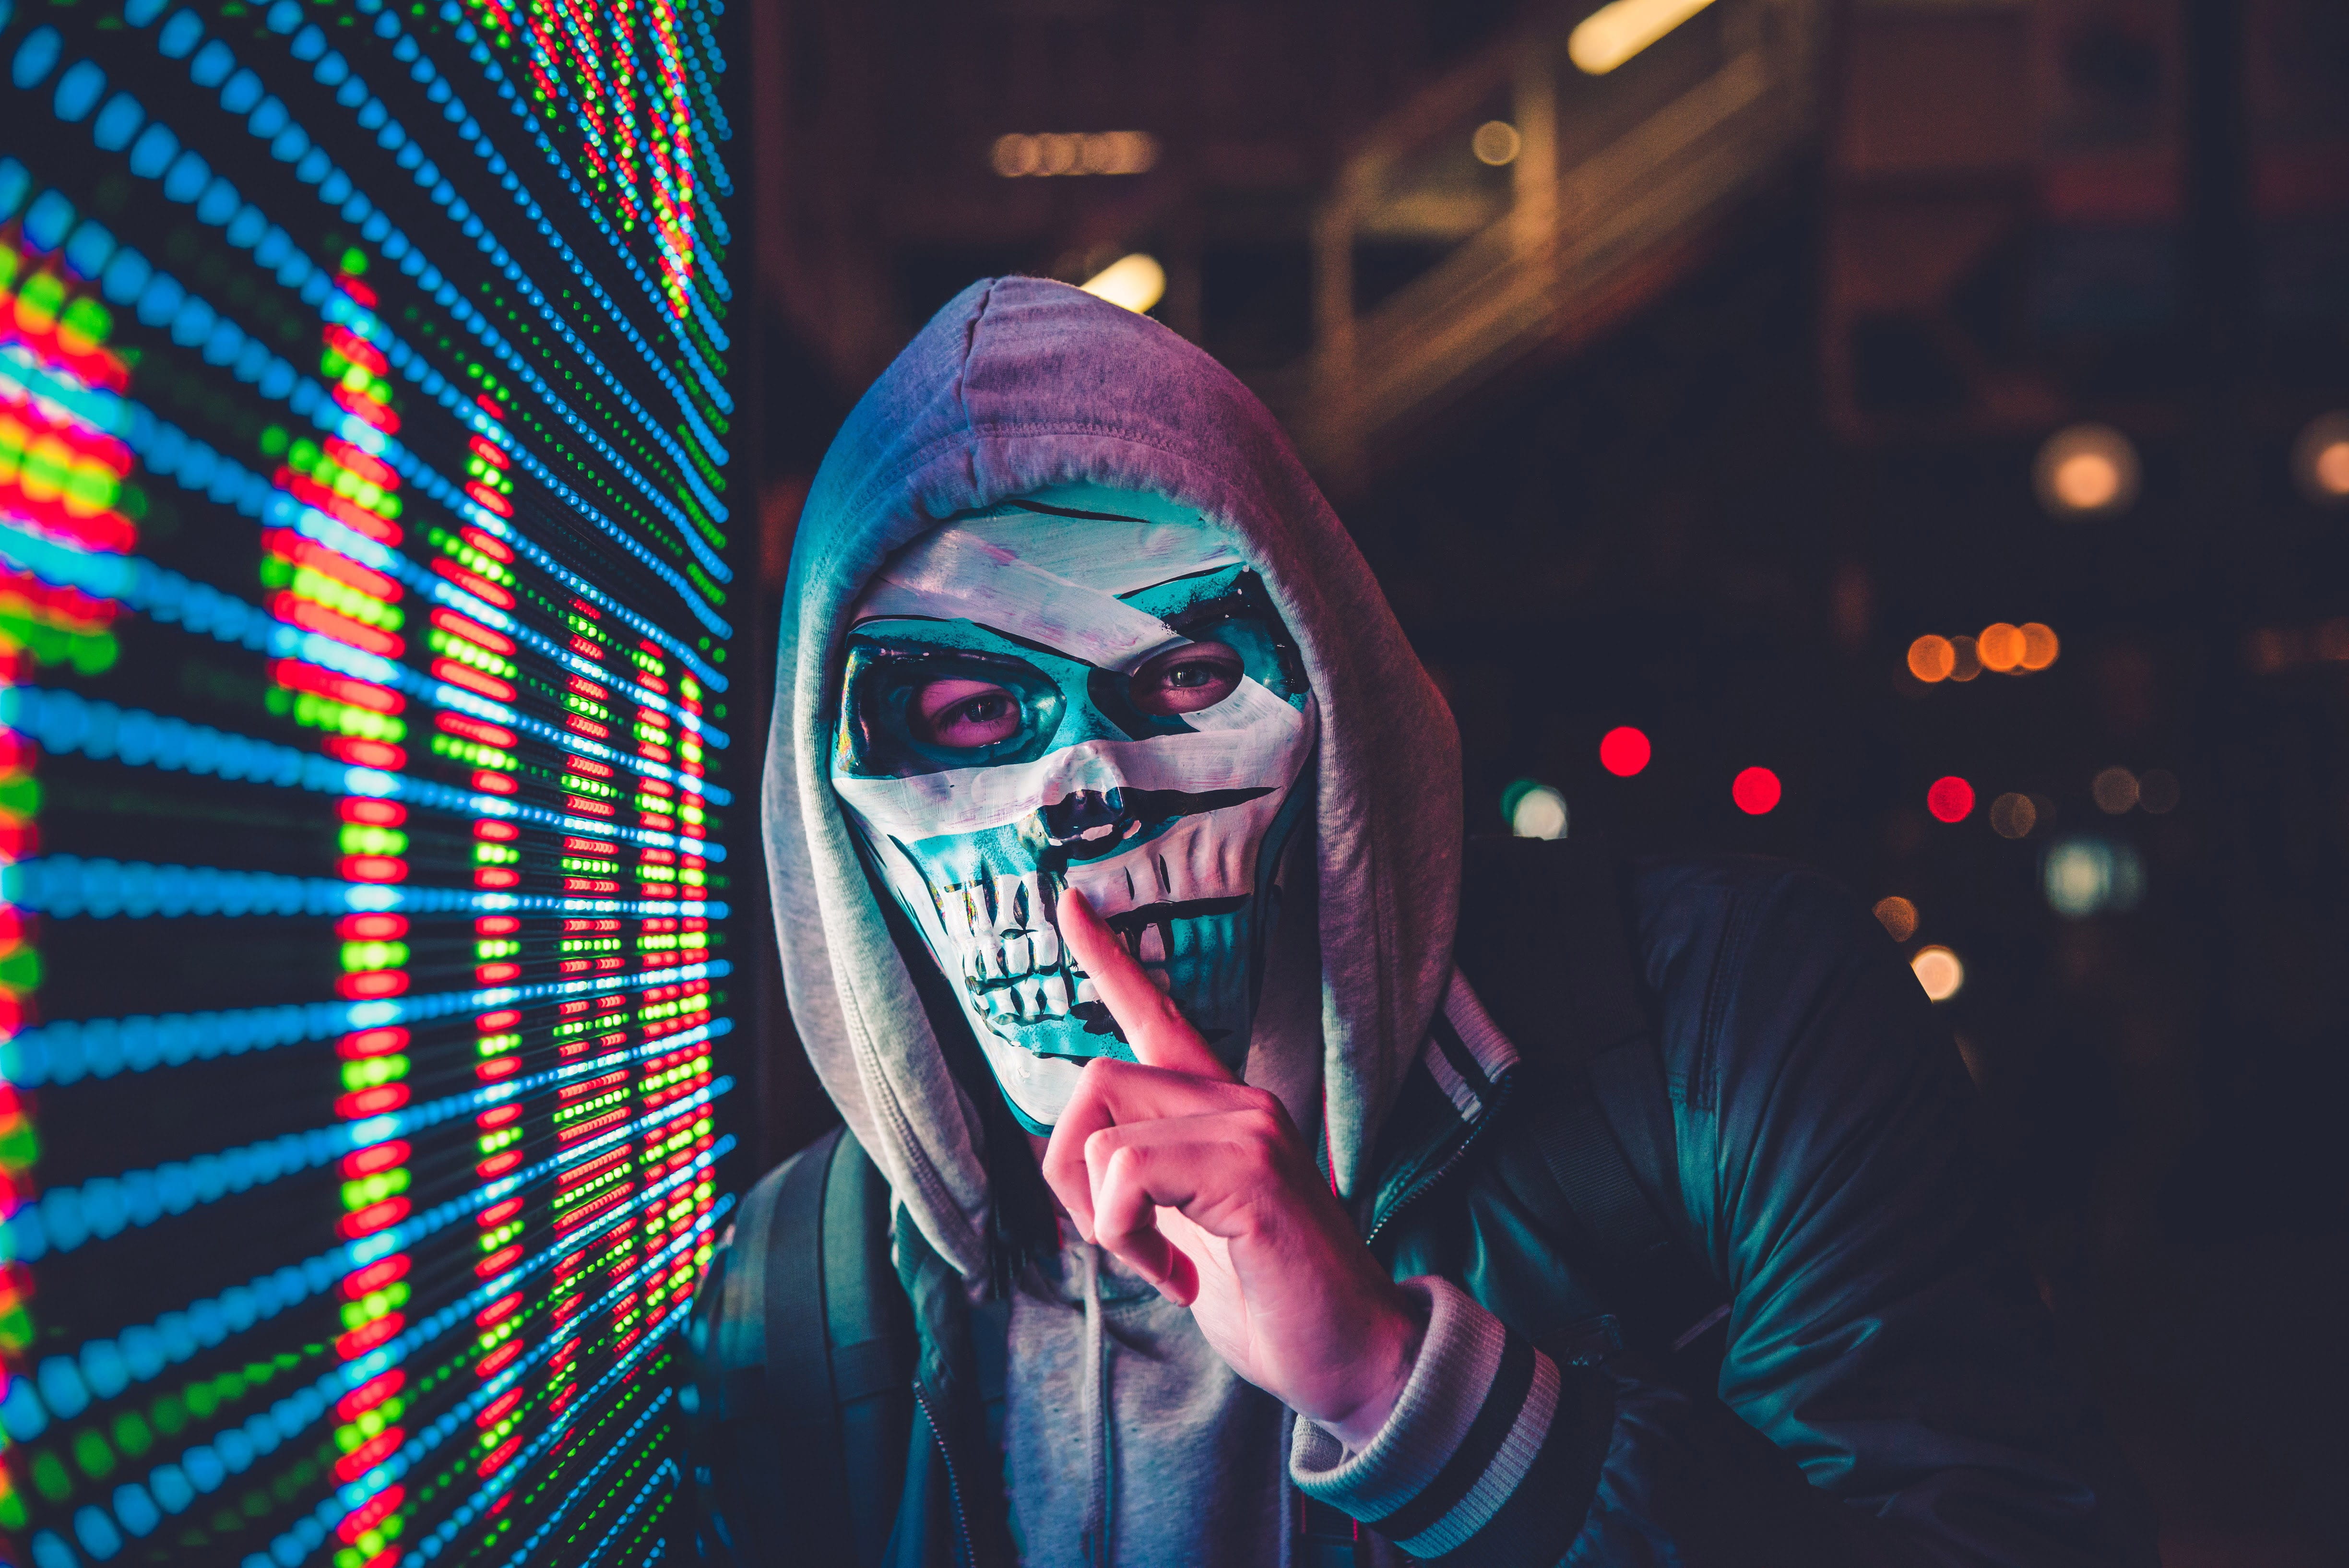 person standing near LED sign, person wearing skull mask and hooded jacket